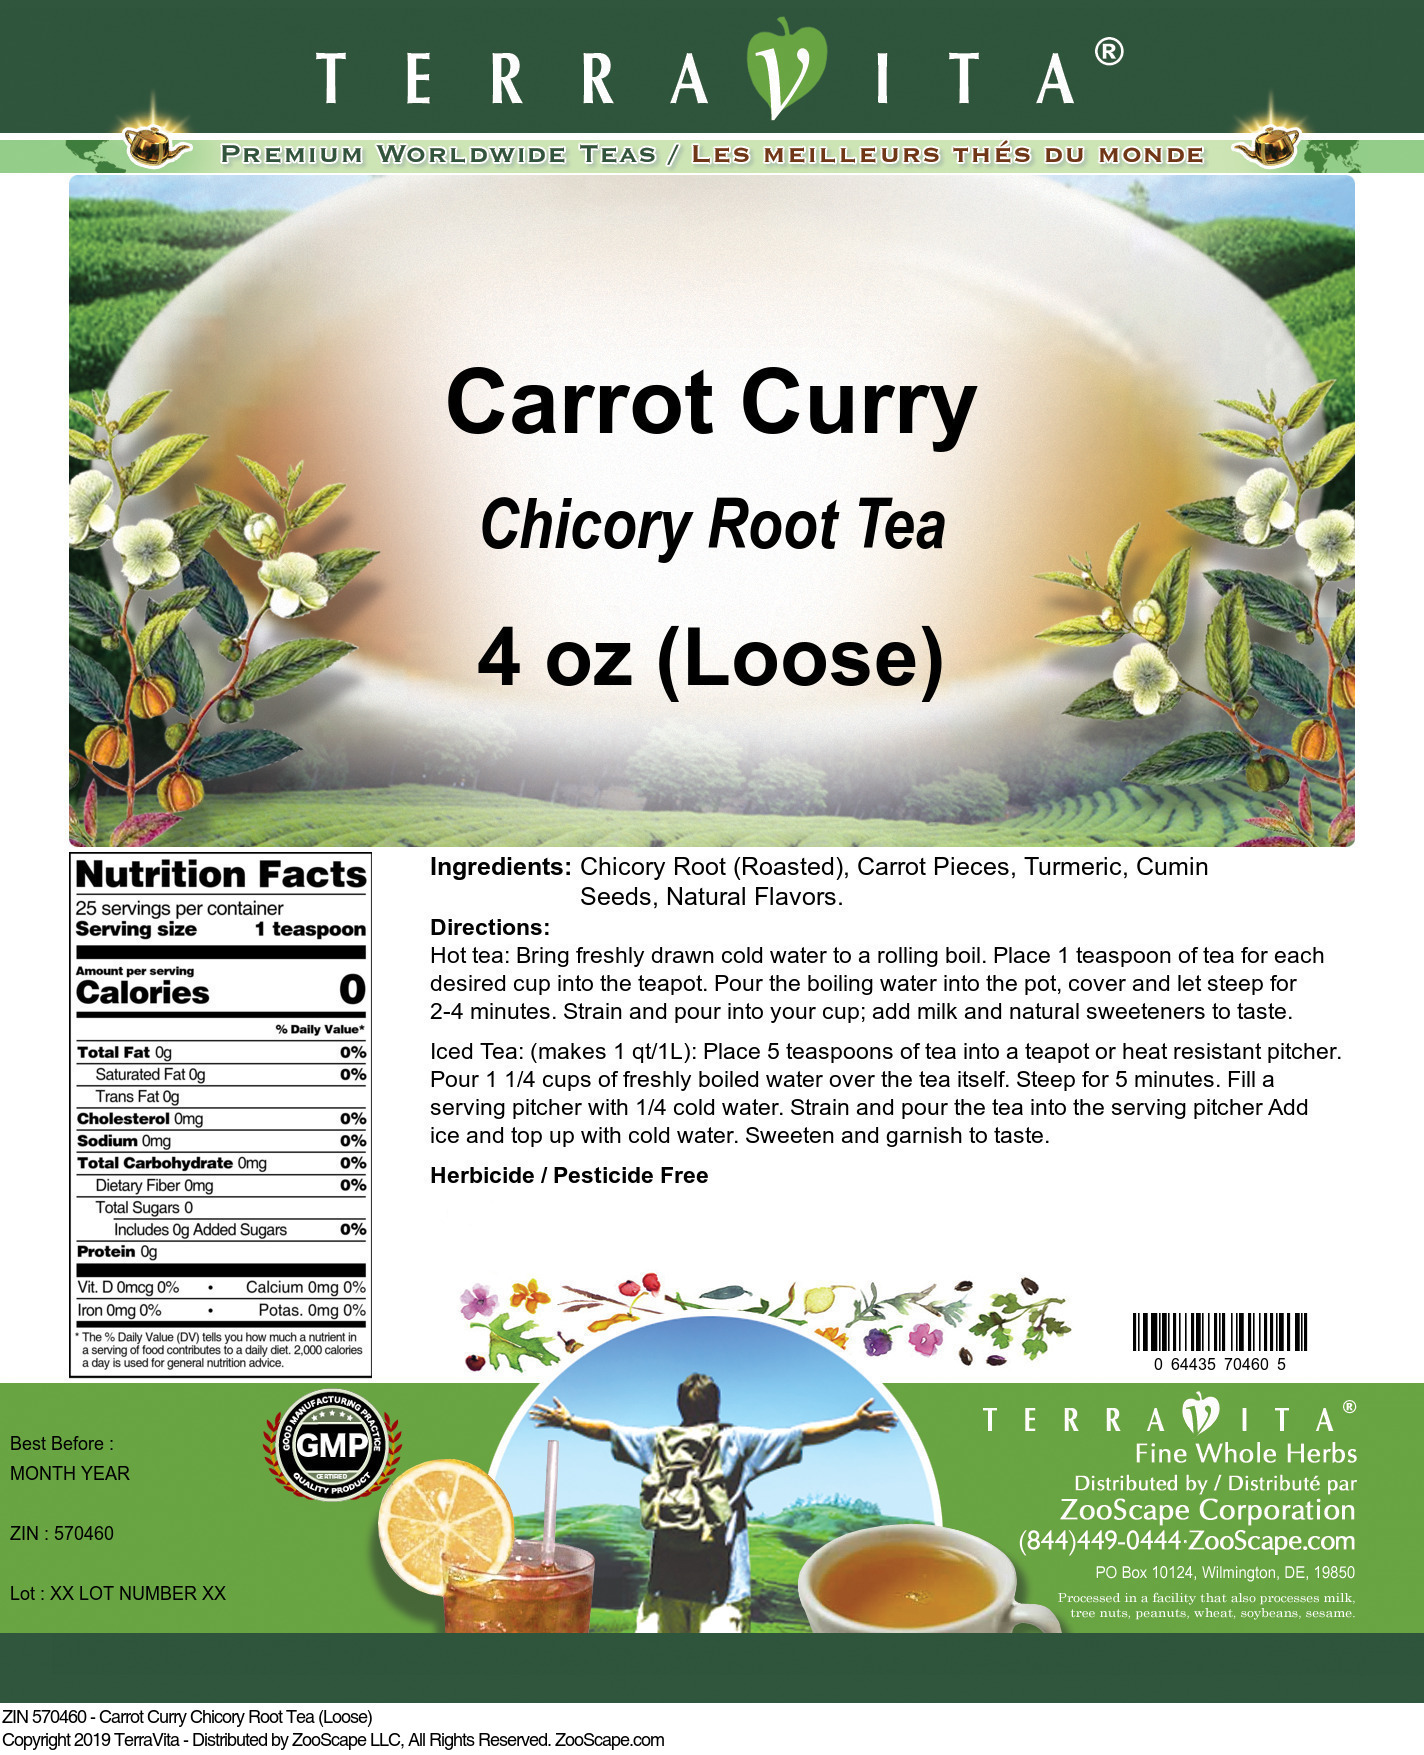 Carrot Curry Chicory Root Tea (Loose) - Label